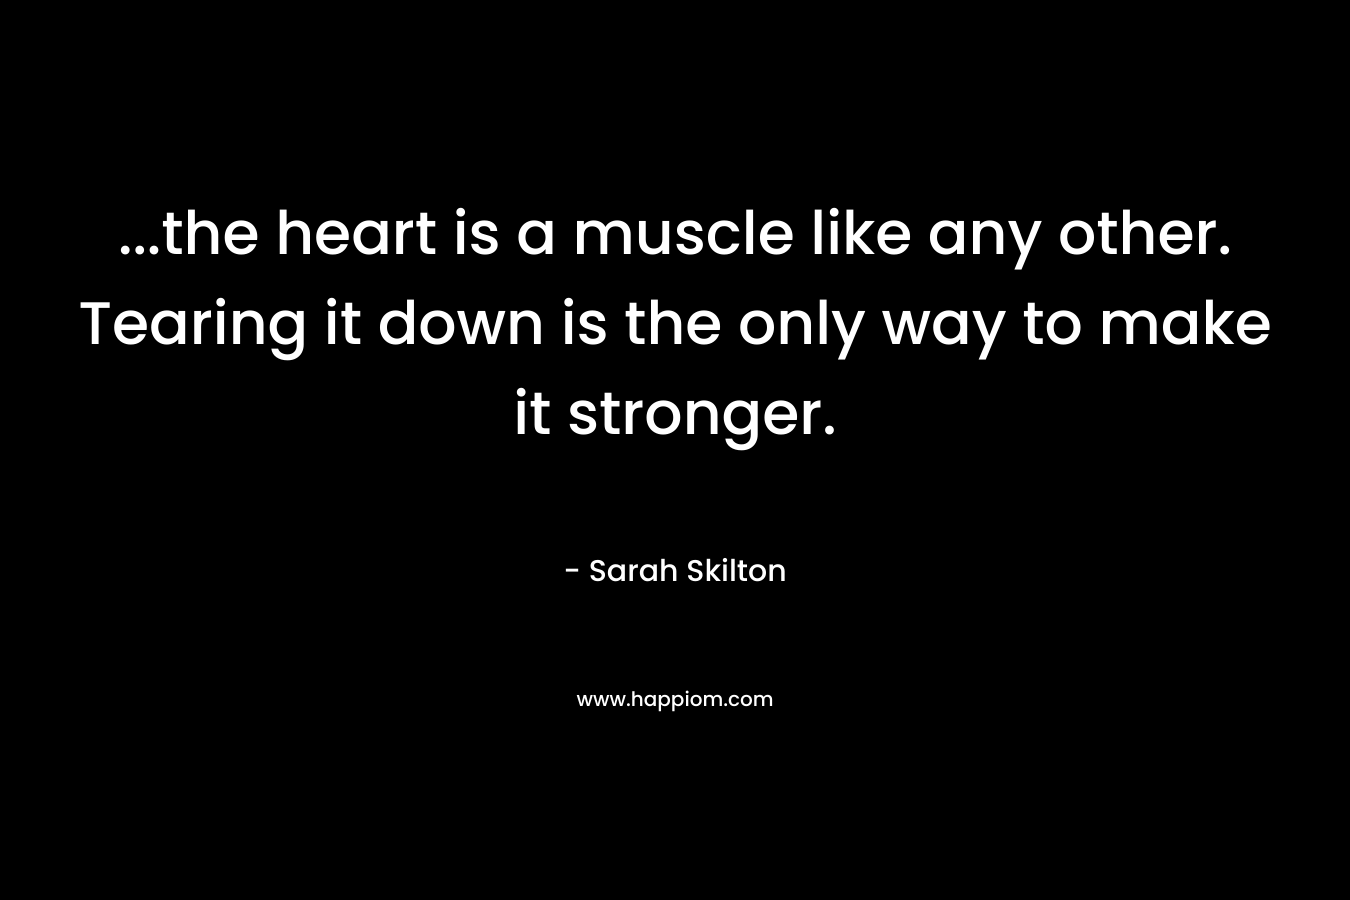 …the heart is a muscle like any other. Tearing it down is the only way to make it stronger. – Sarah Skilton